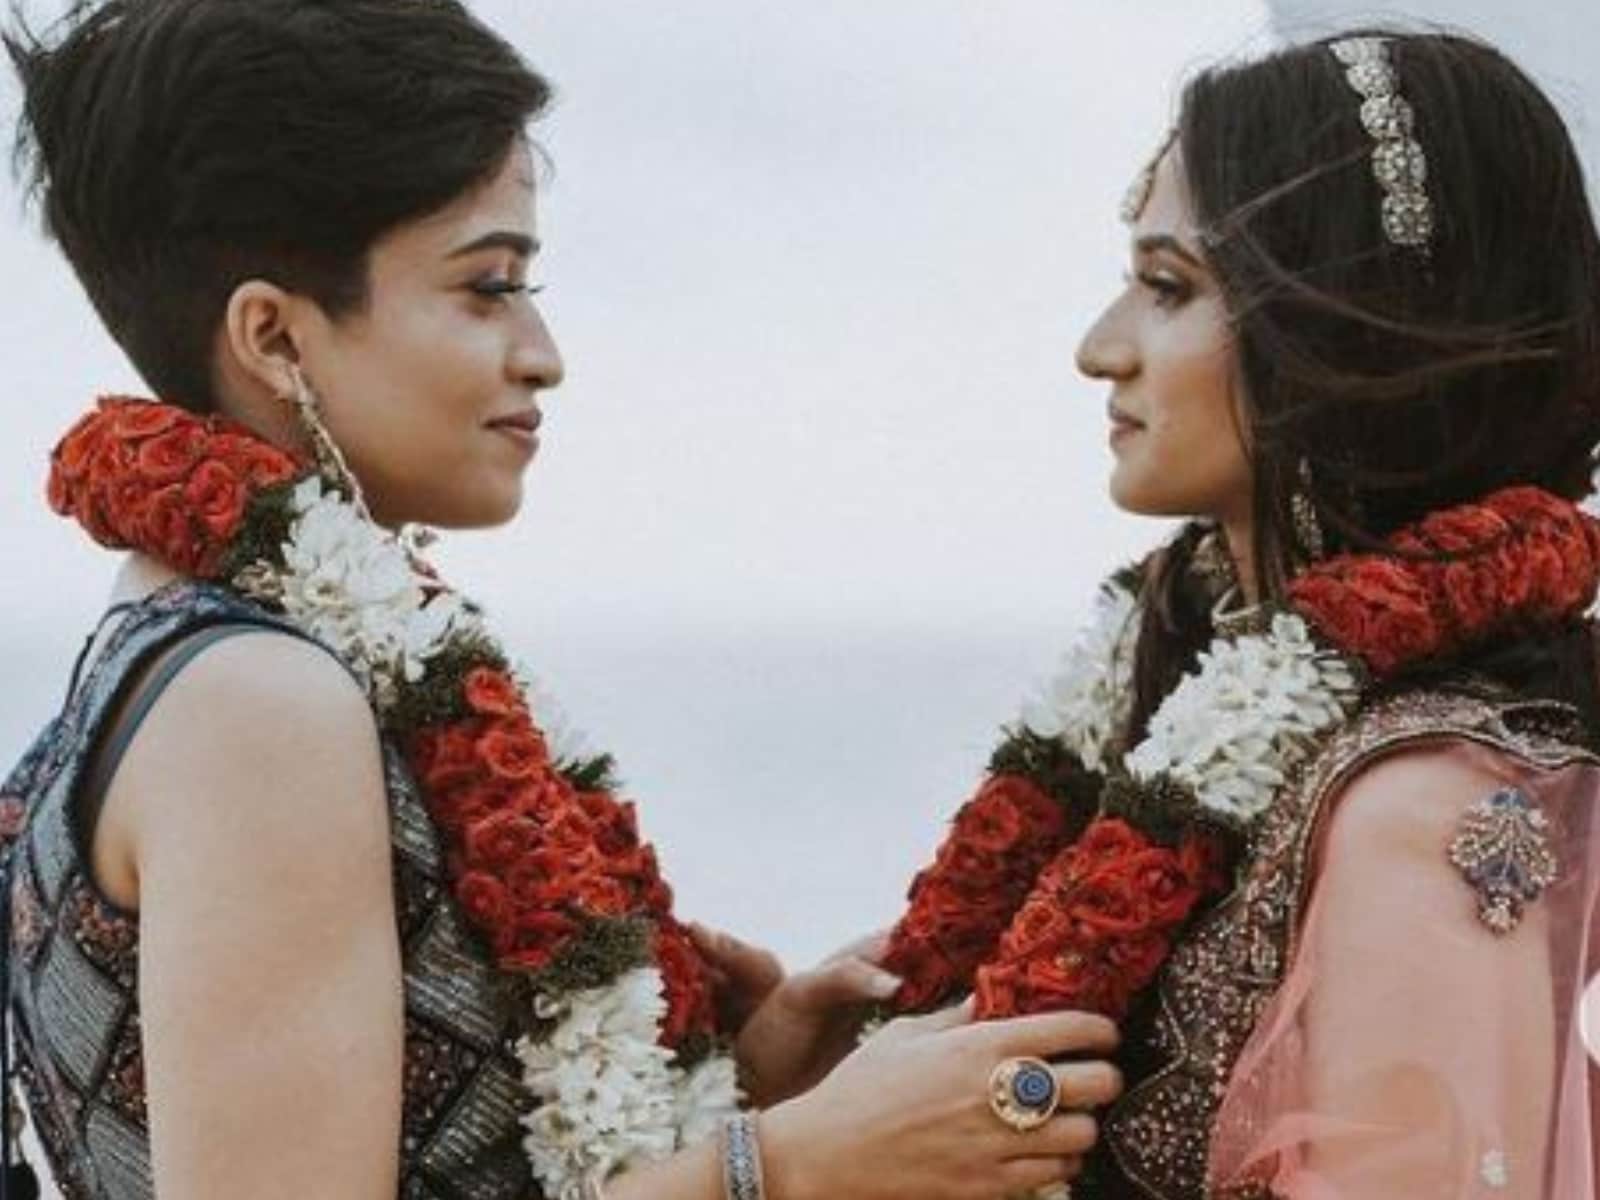 Kerala Lesbian Couple, Once Separated by Families, Turns Brides in Wedding Photoshoot